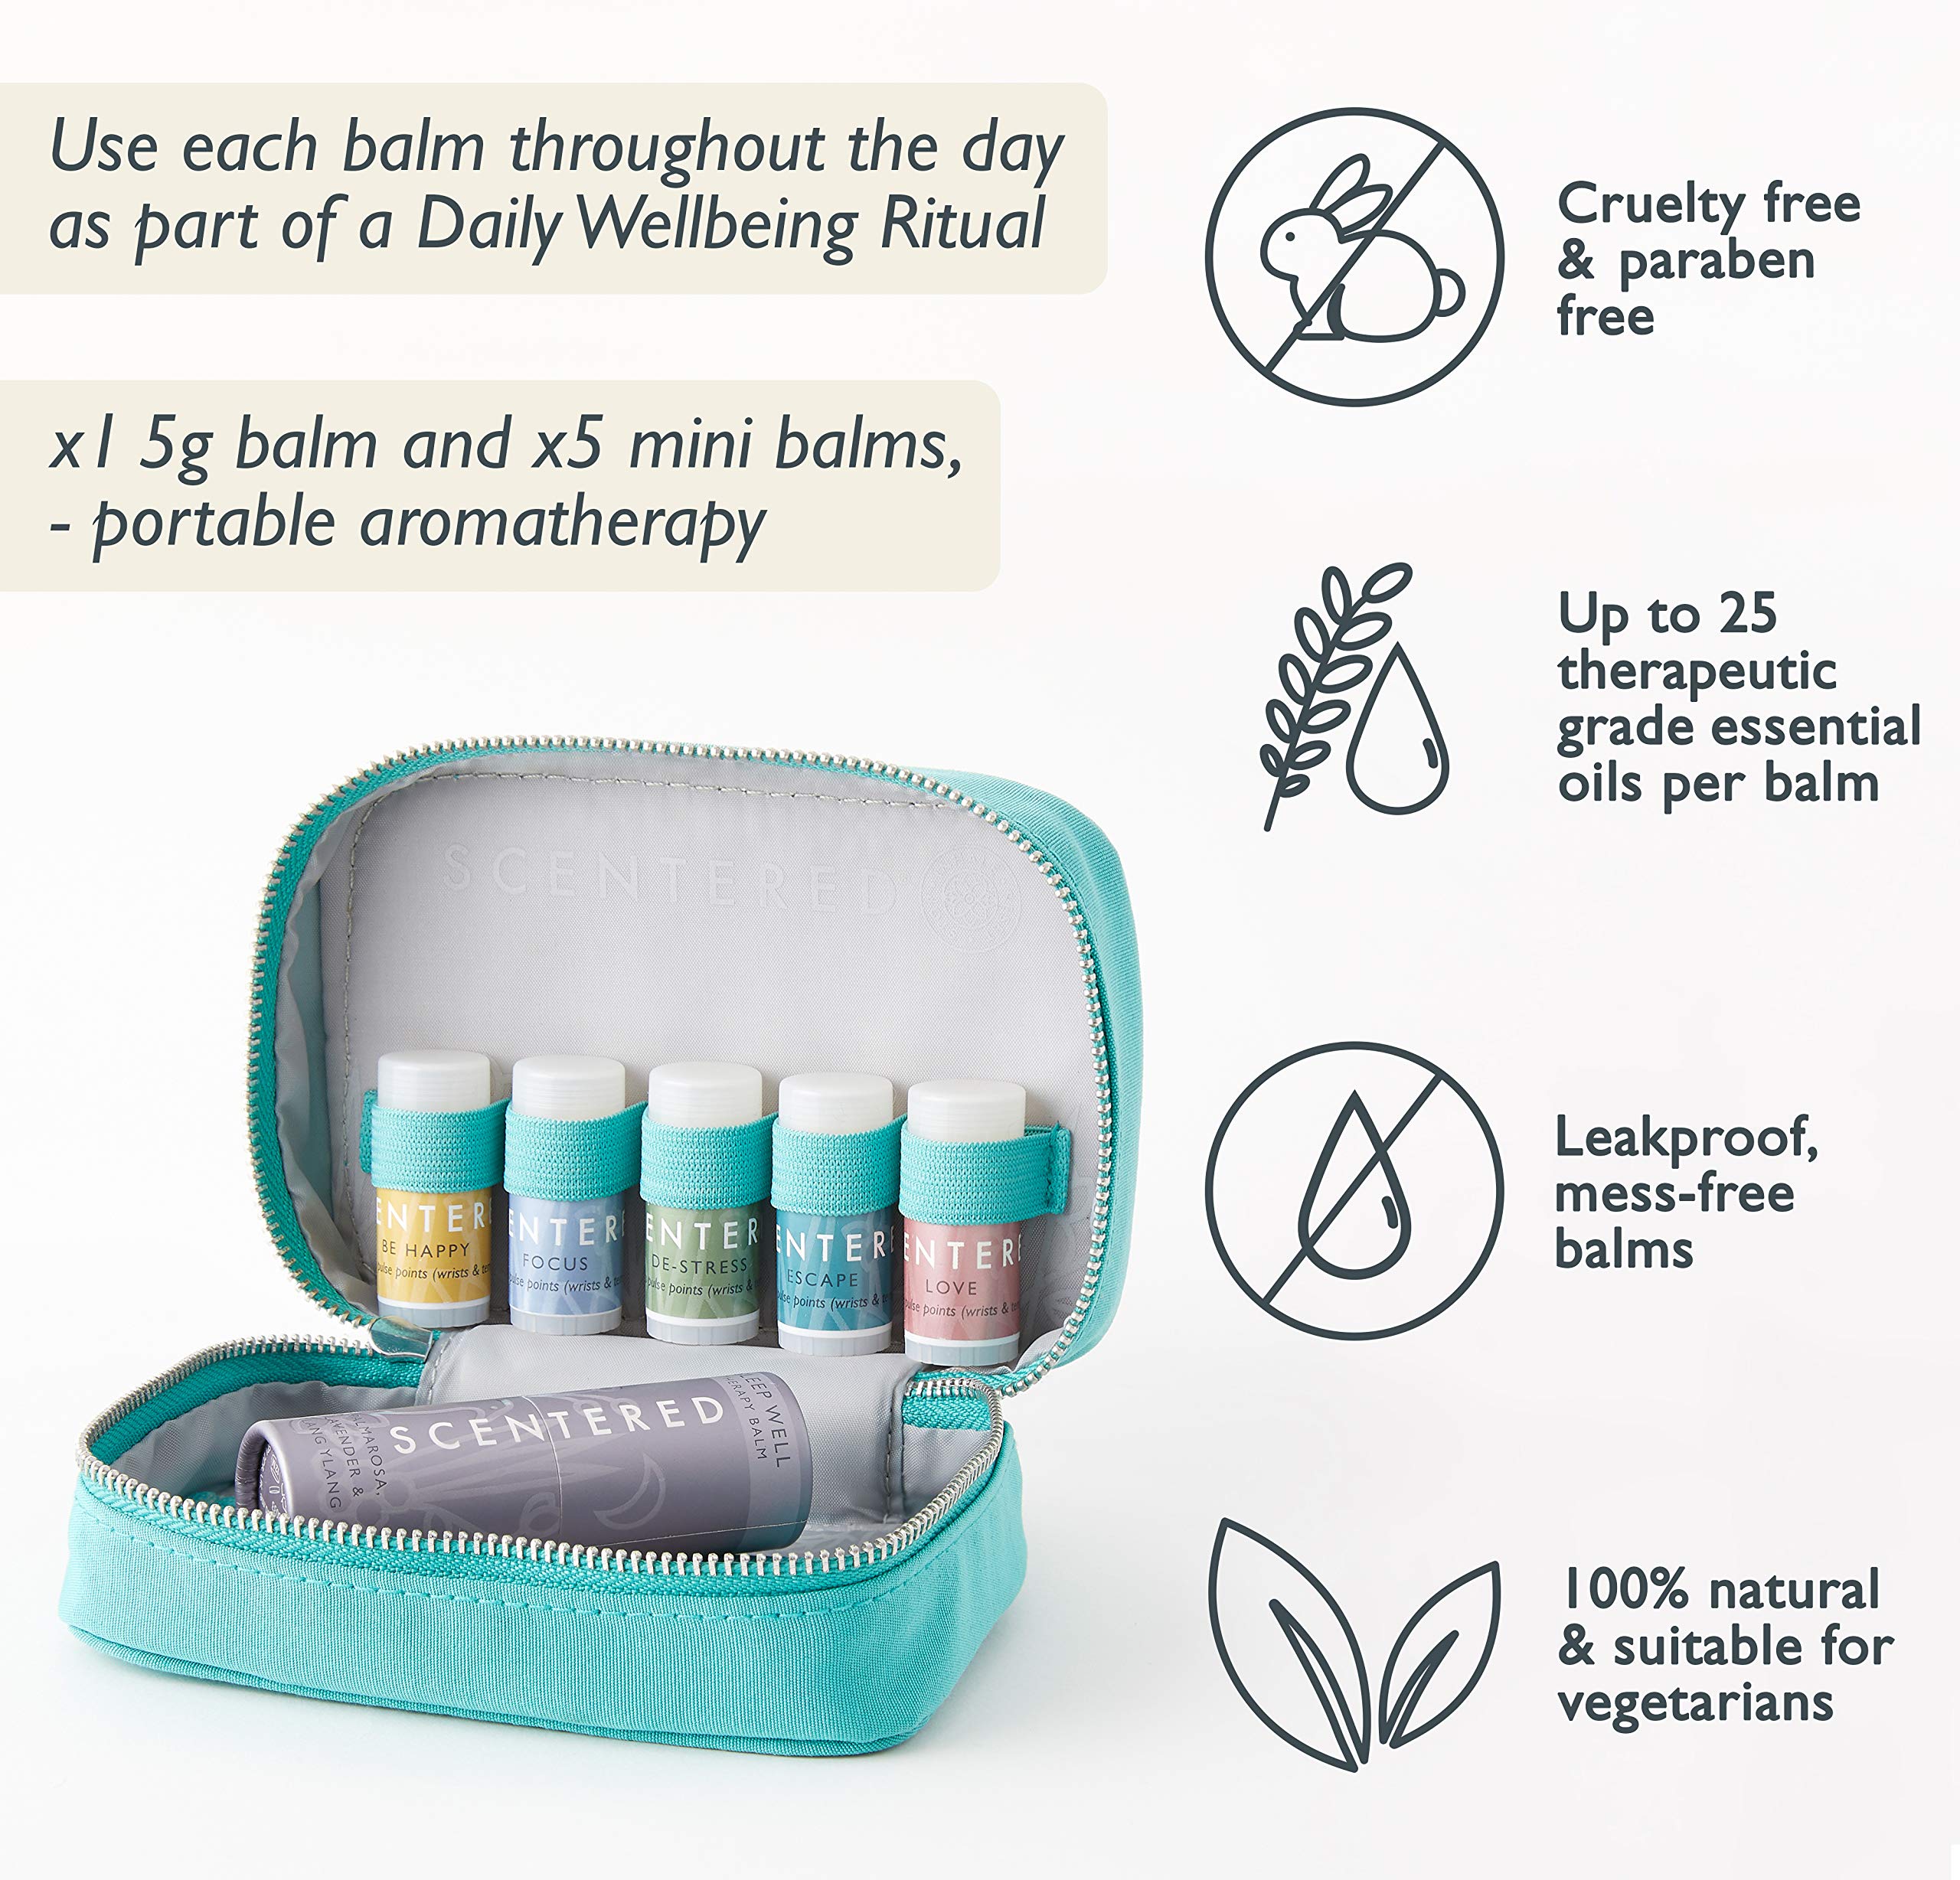 Scentered Daily Ritual Aromatherapy Balm Gift Set - Essential Oil Blends: 1 x Sleep Well (5g), 5 x Mini Balms: De-Stress, Focus, Happy, Escape & Love